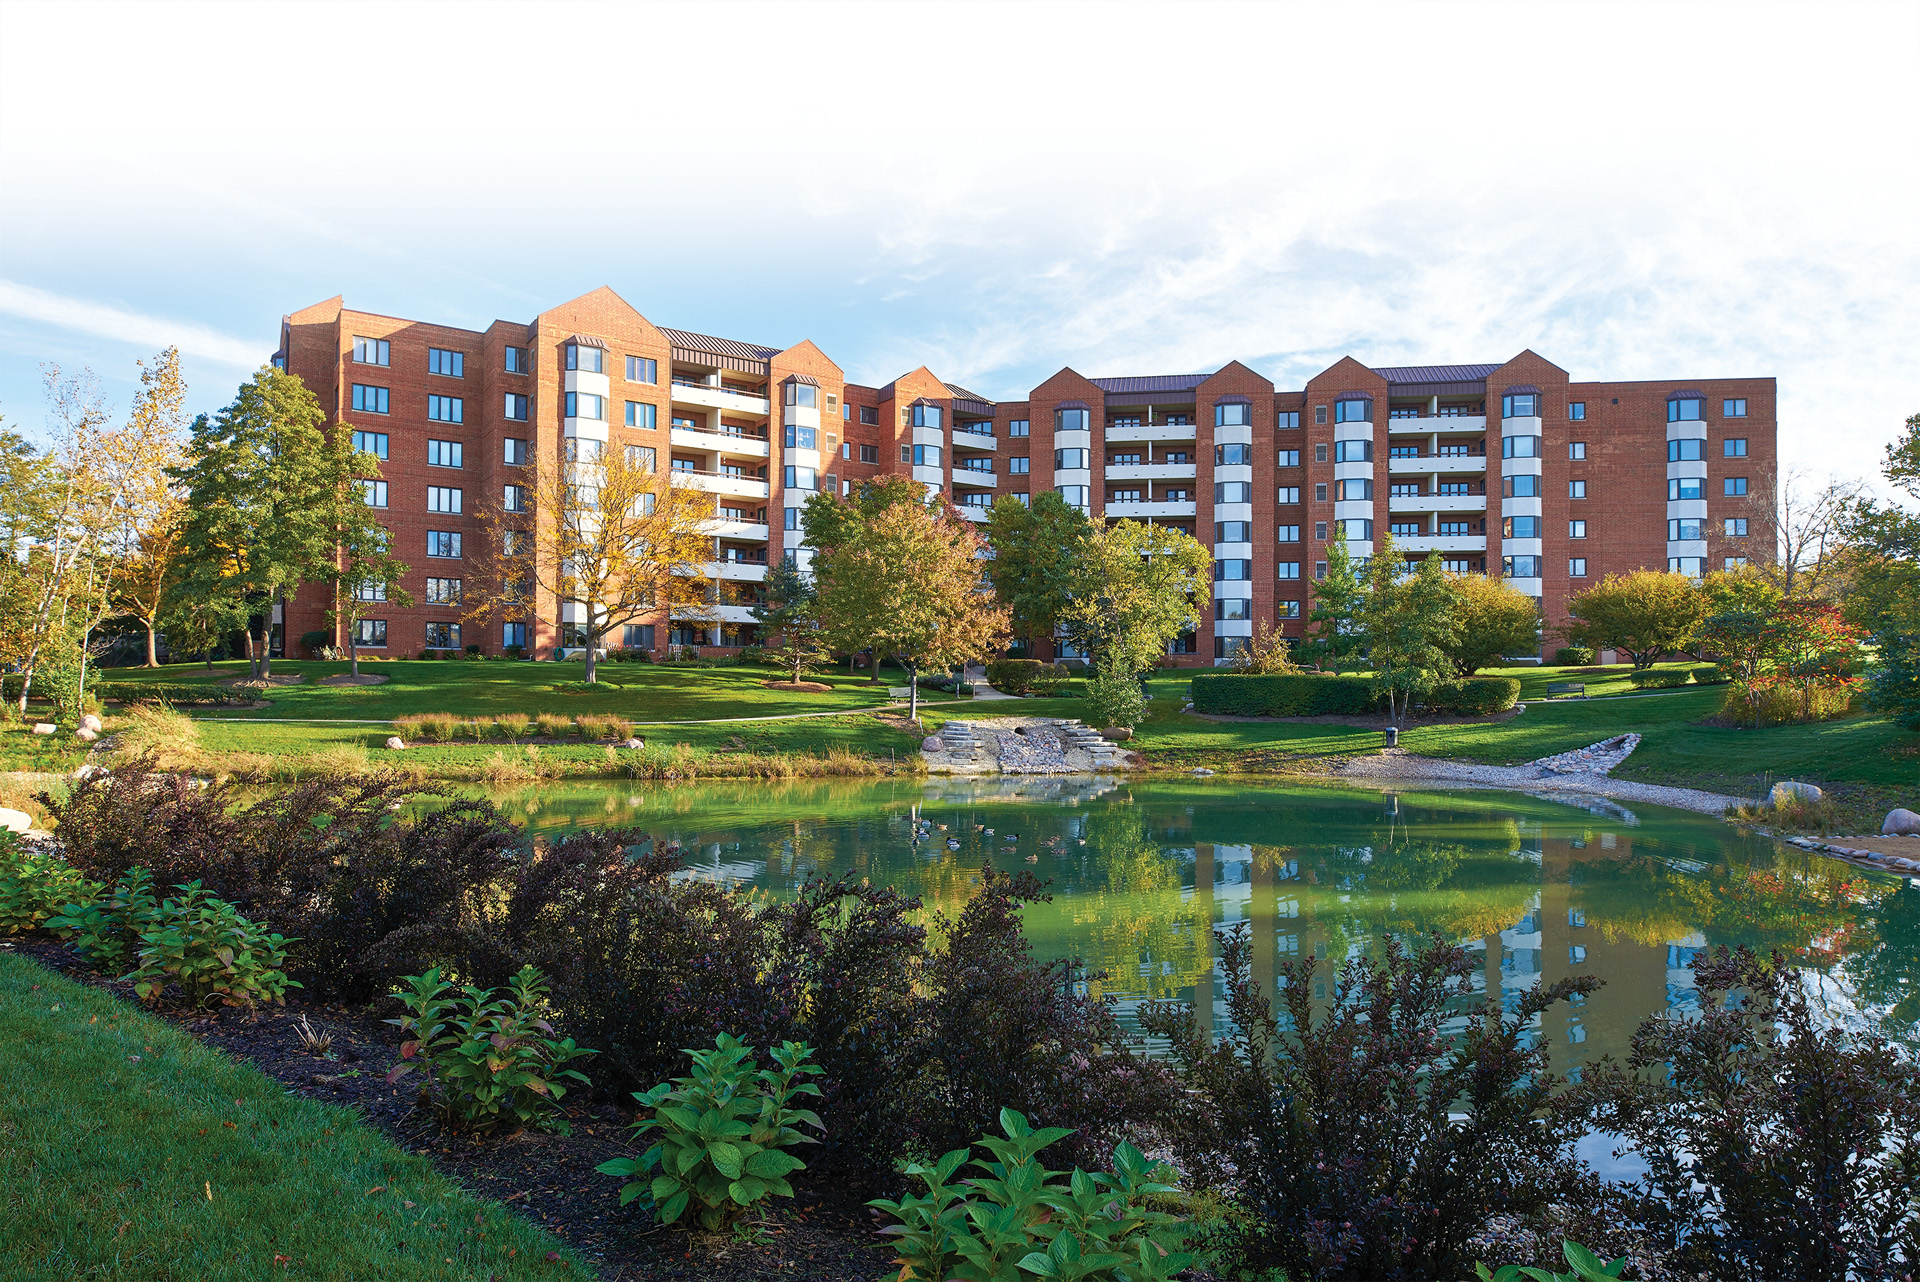 view of pond and green landscaping outside of a residential building at Beacon Hill Senior Living Community